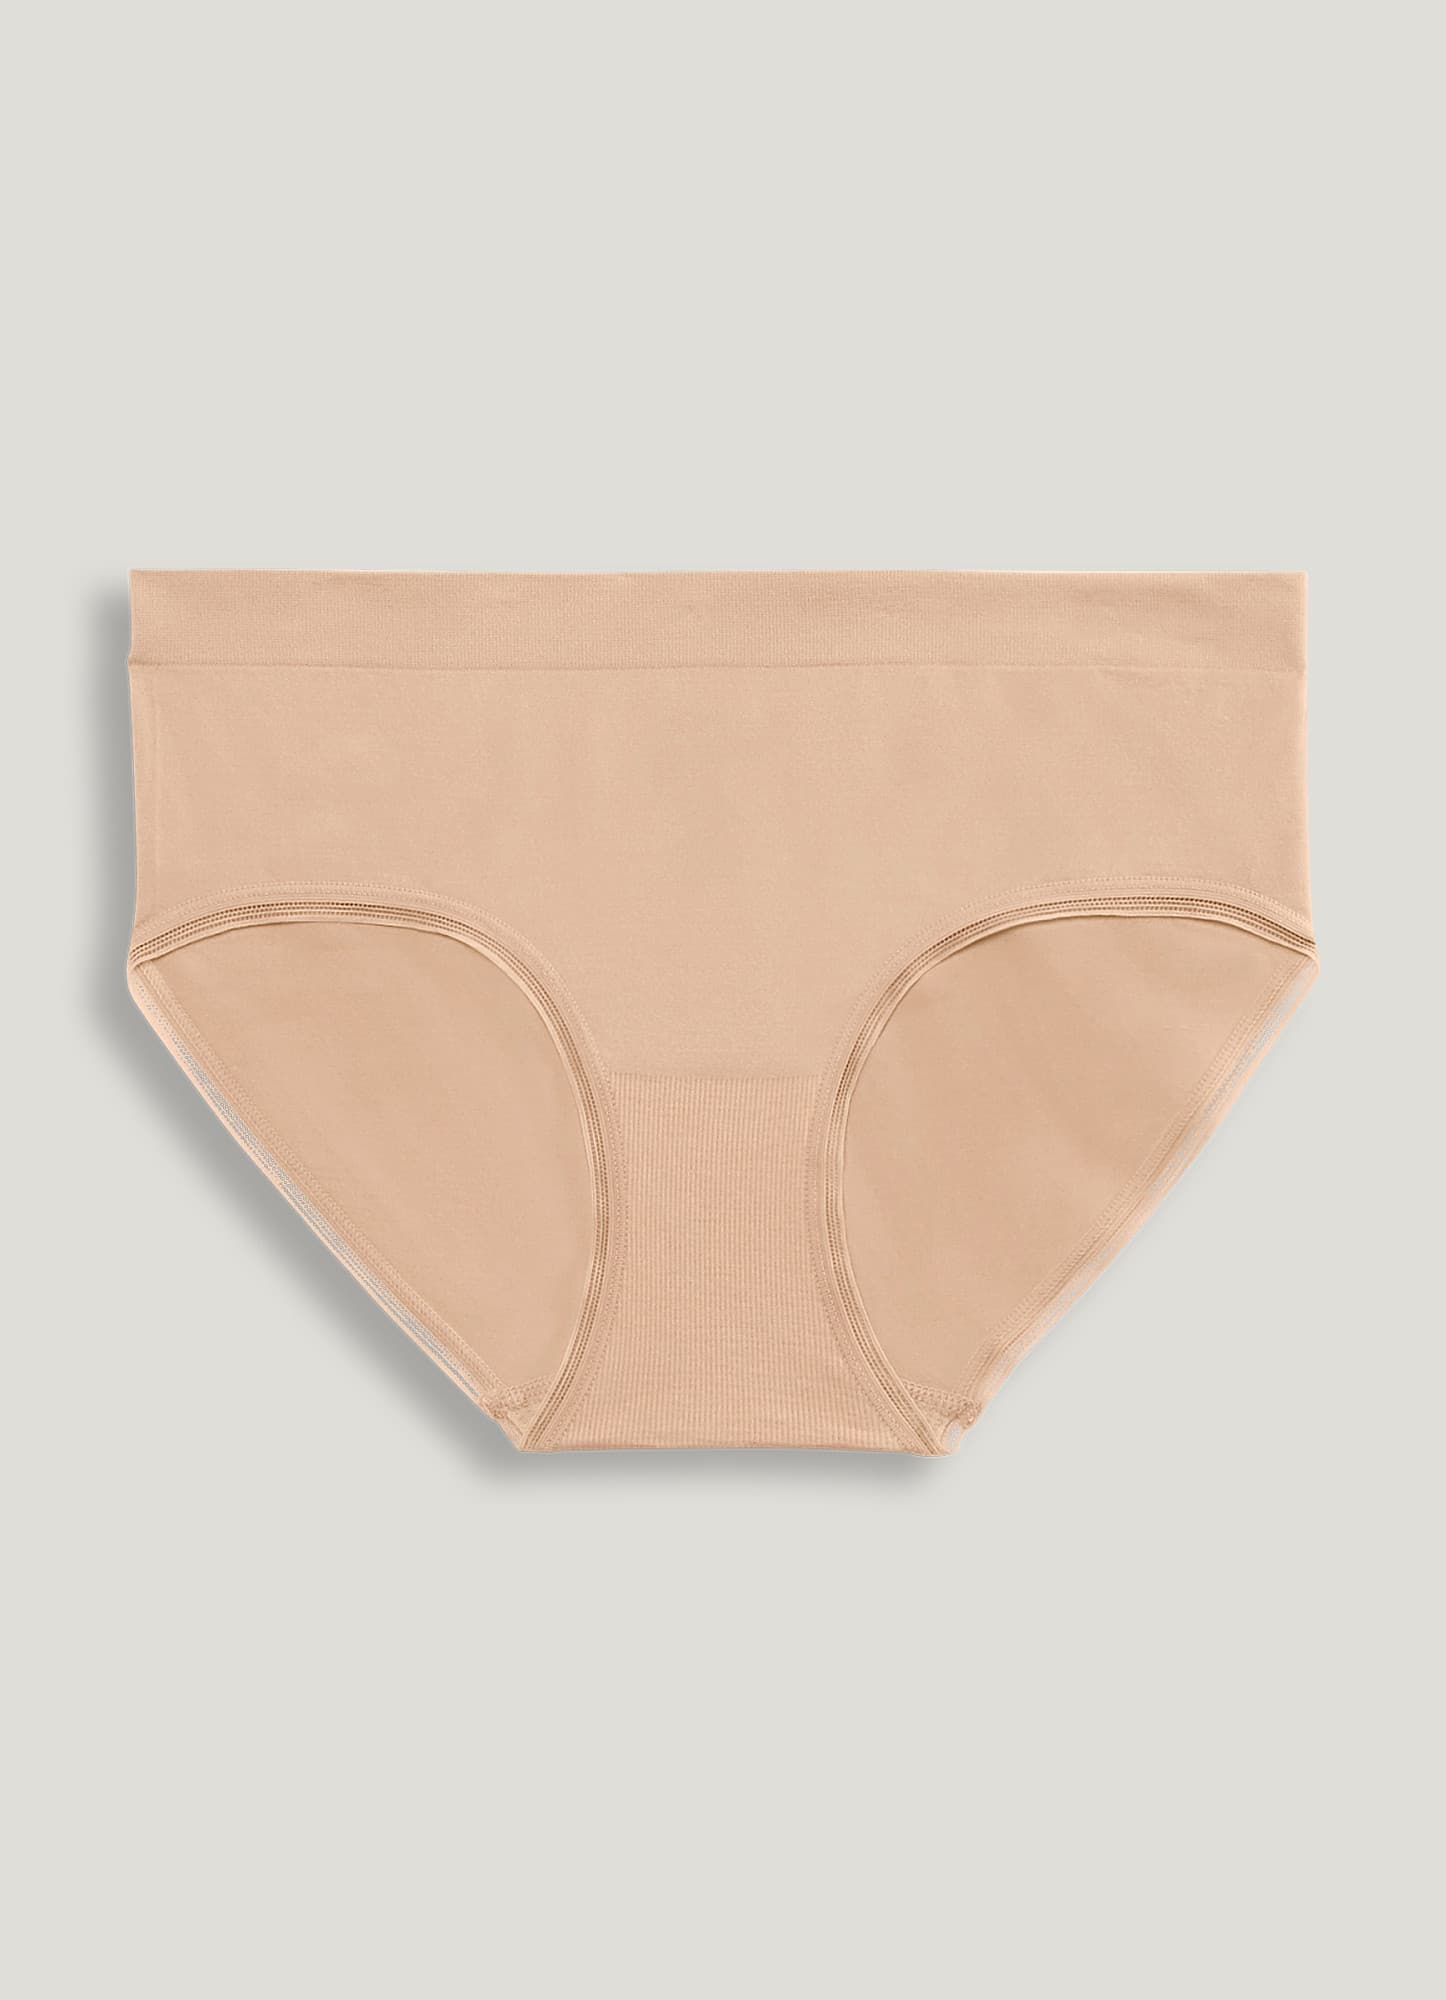 Which is more comfortable; cotton or microfiber panties? - Quora